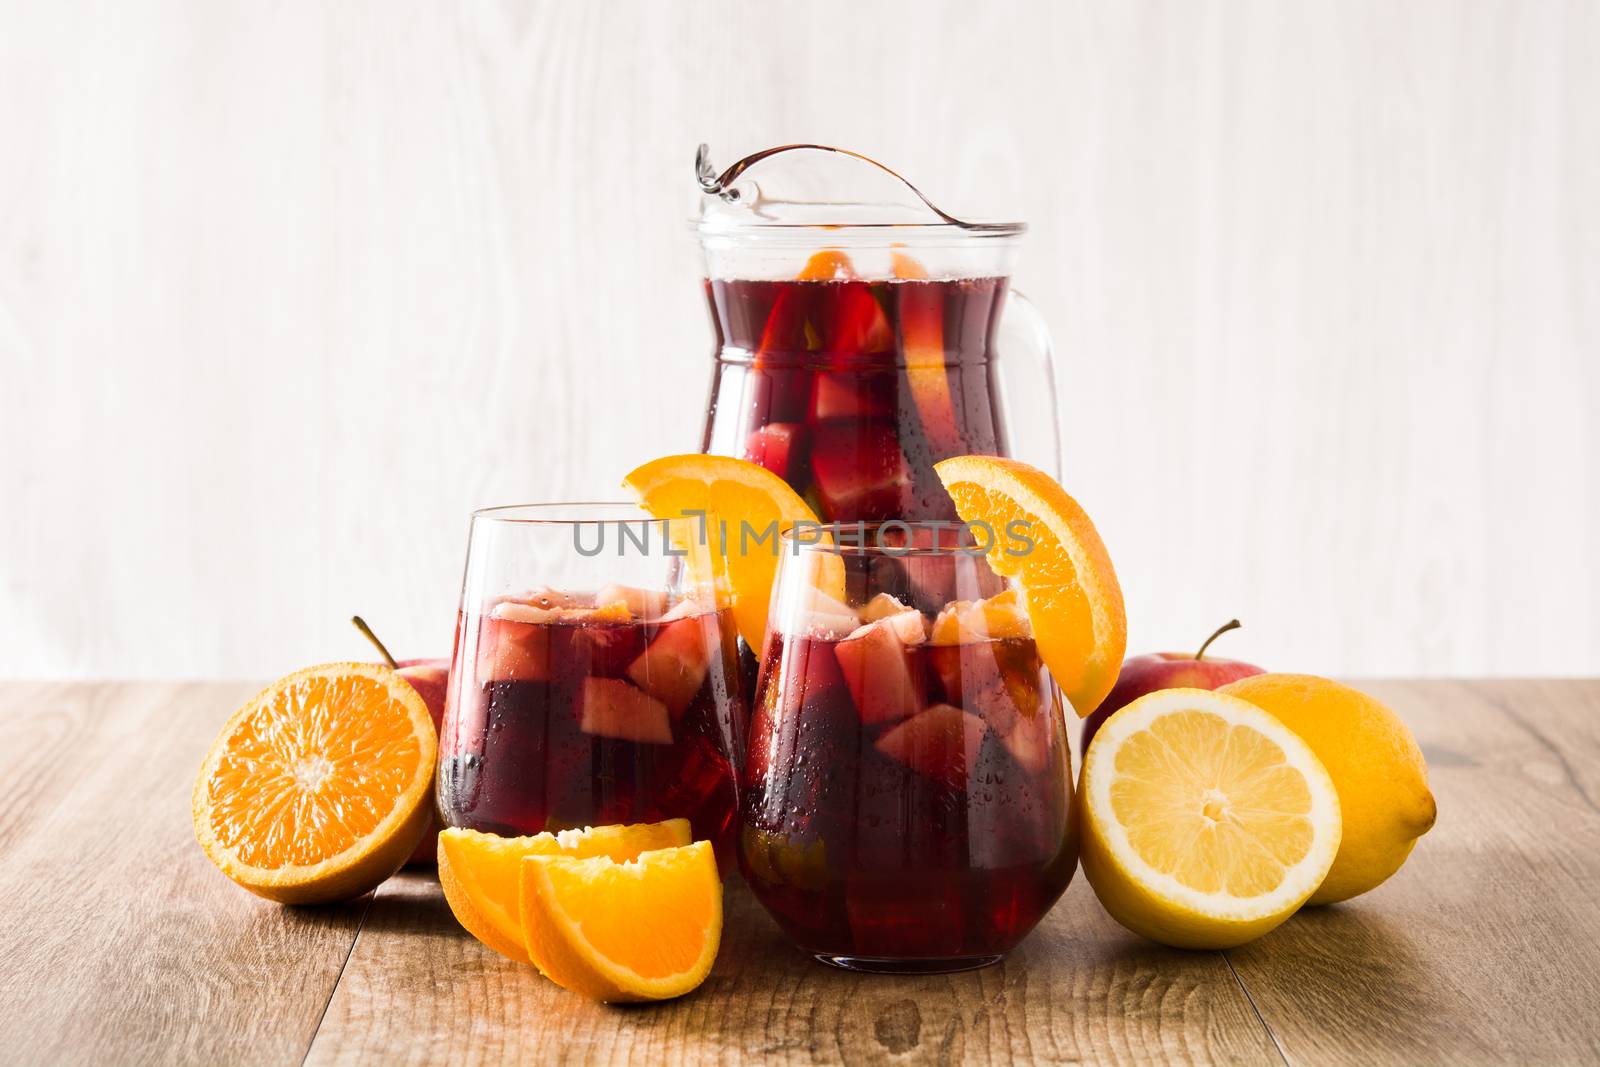 Red wine sangria in glass on wooden table. by chandlervid85